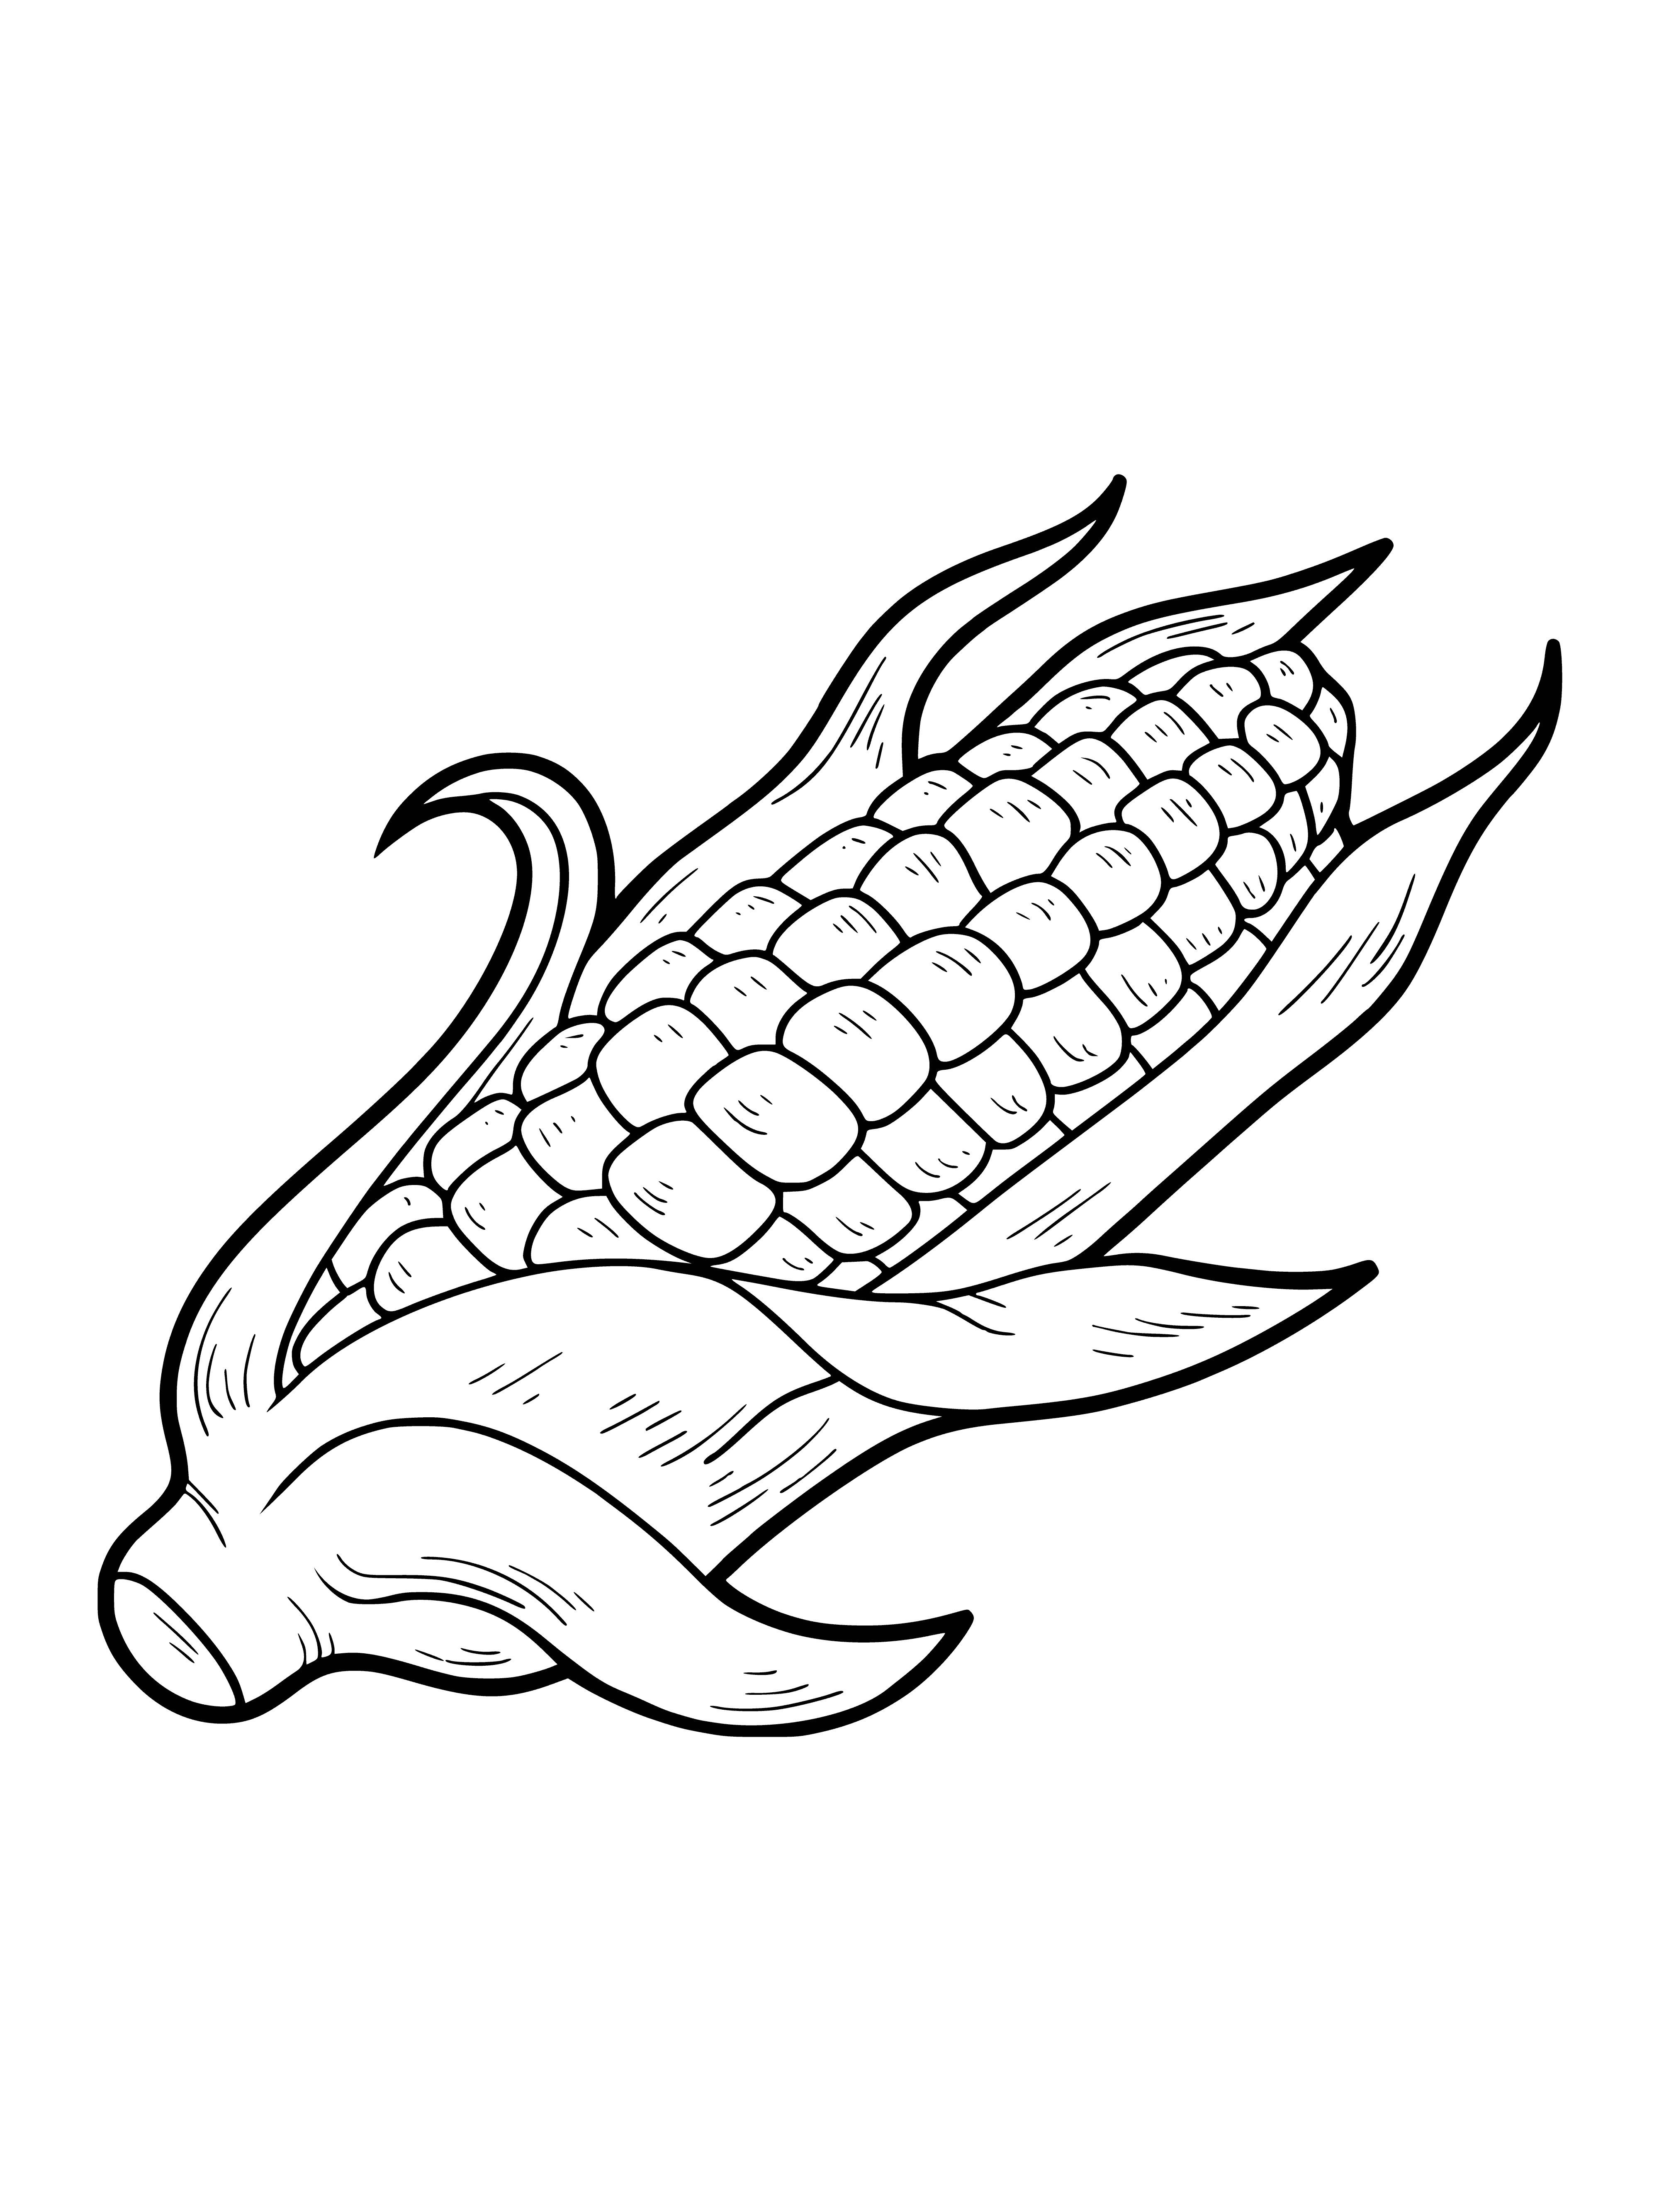 coloring page: Corn plants in a field, ready to harvest. Ears of corn have yellow vegetables and green husks. #corn #harvest